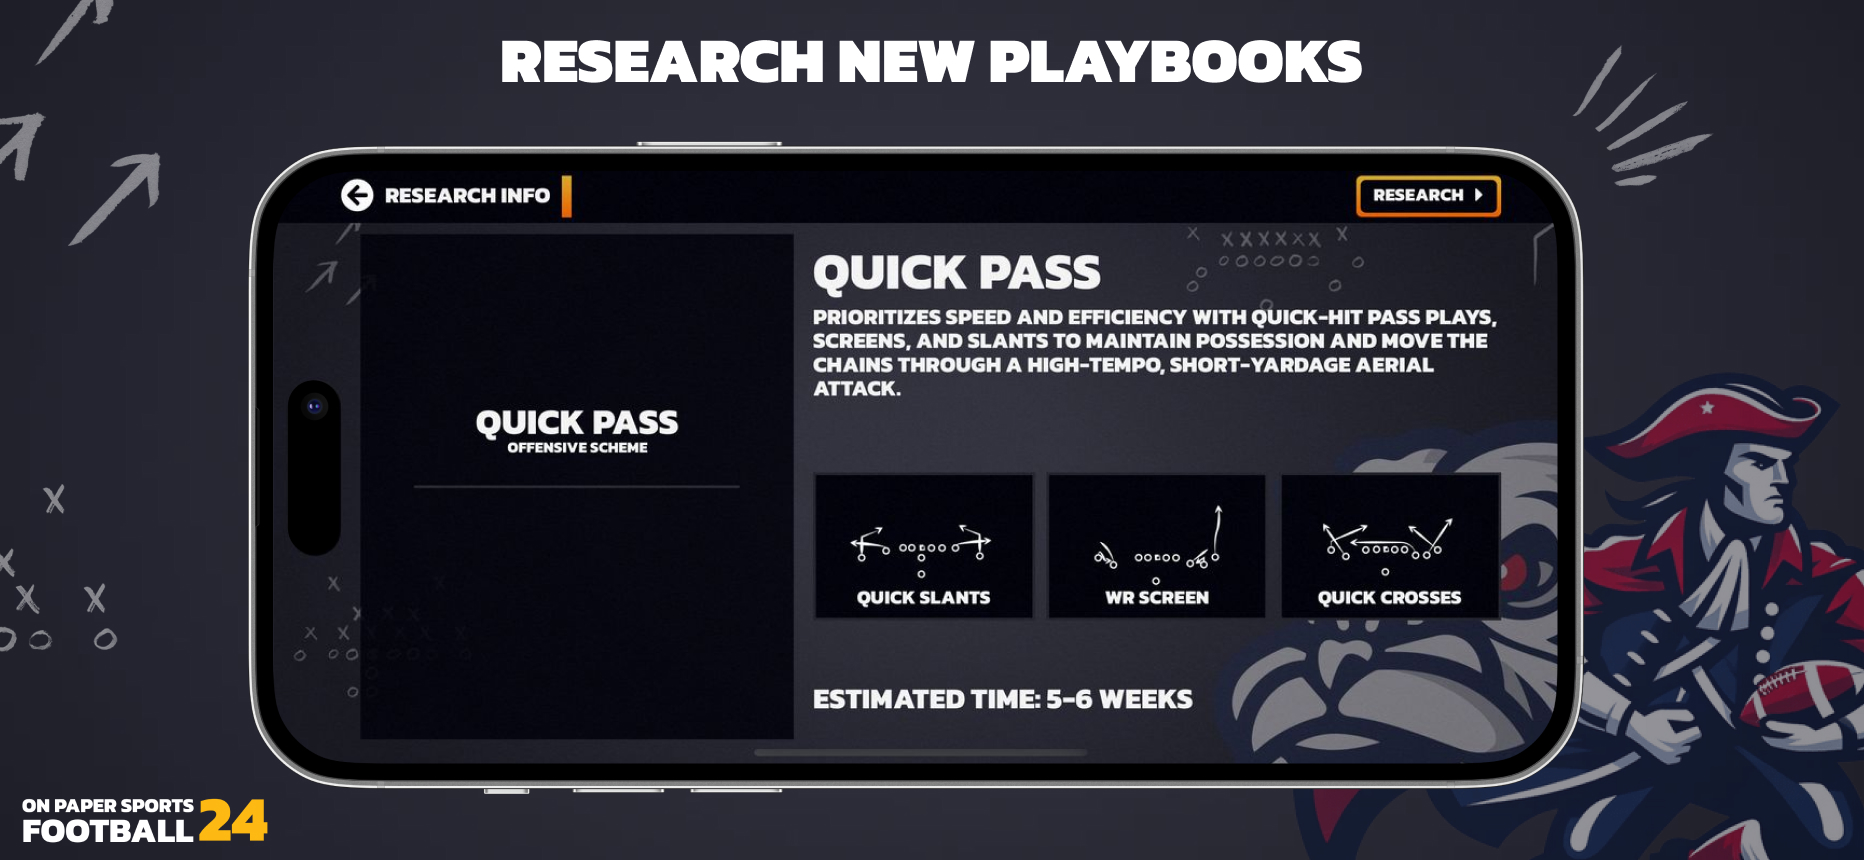 Research new playbooks